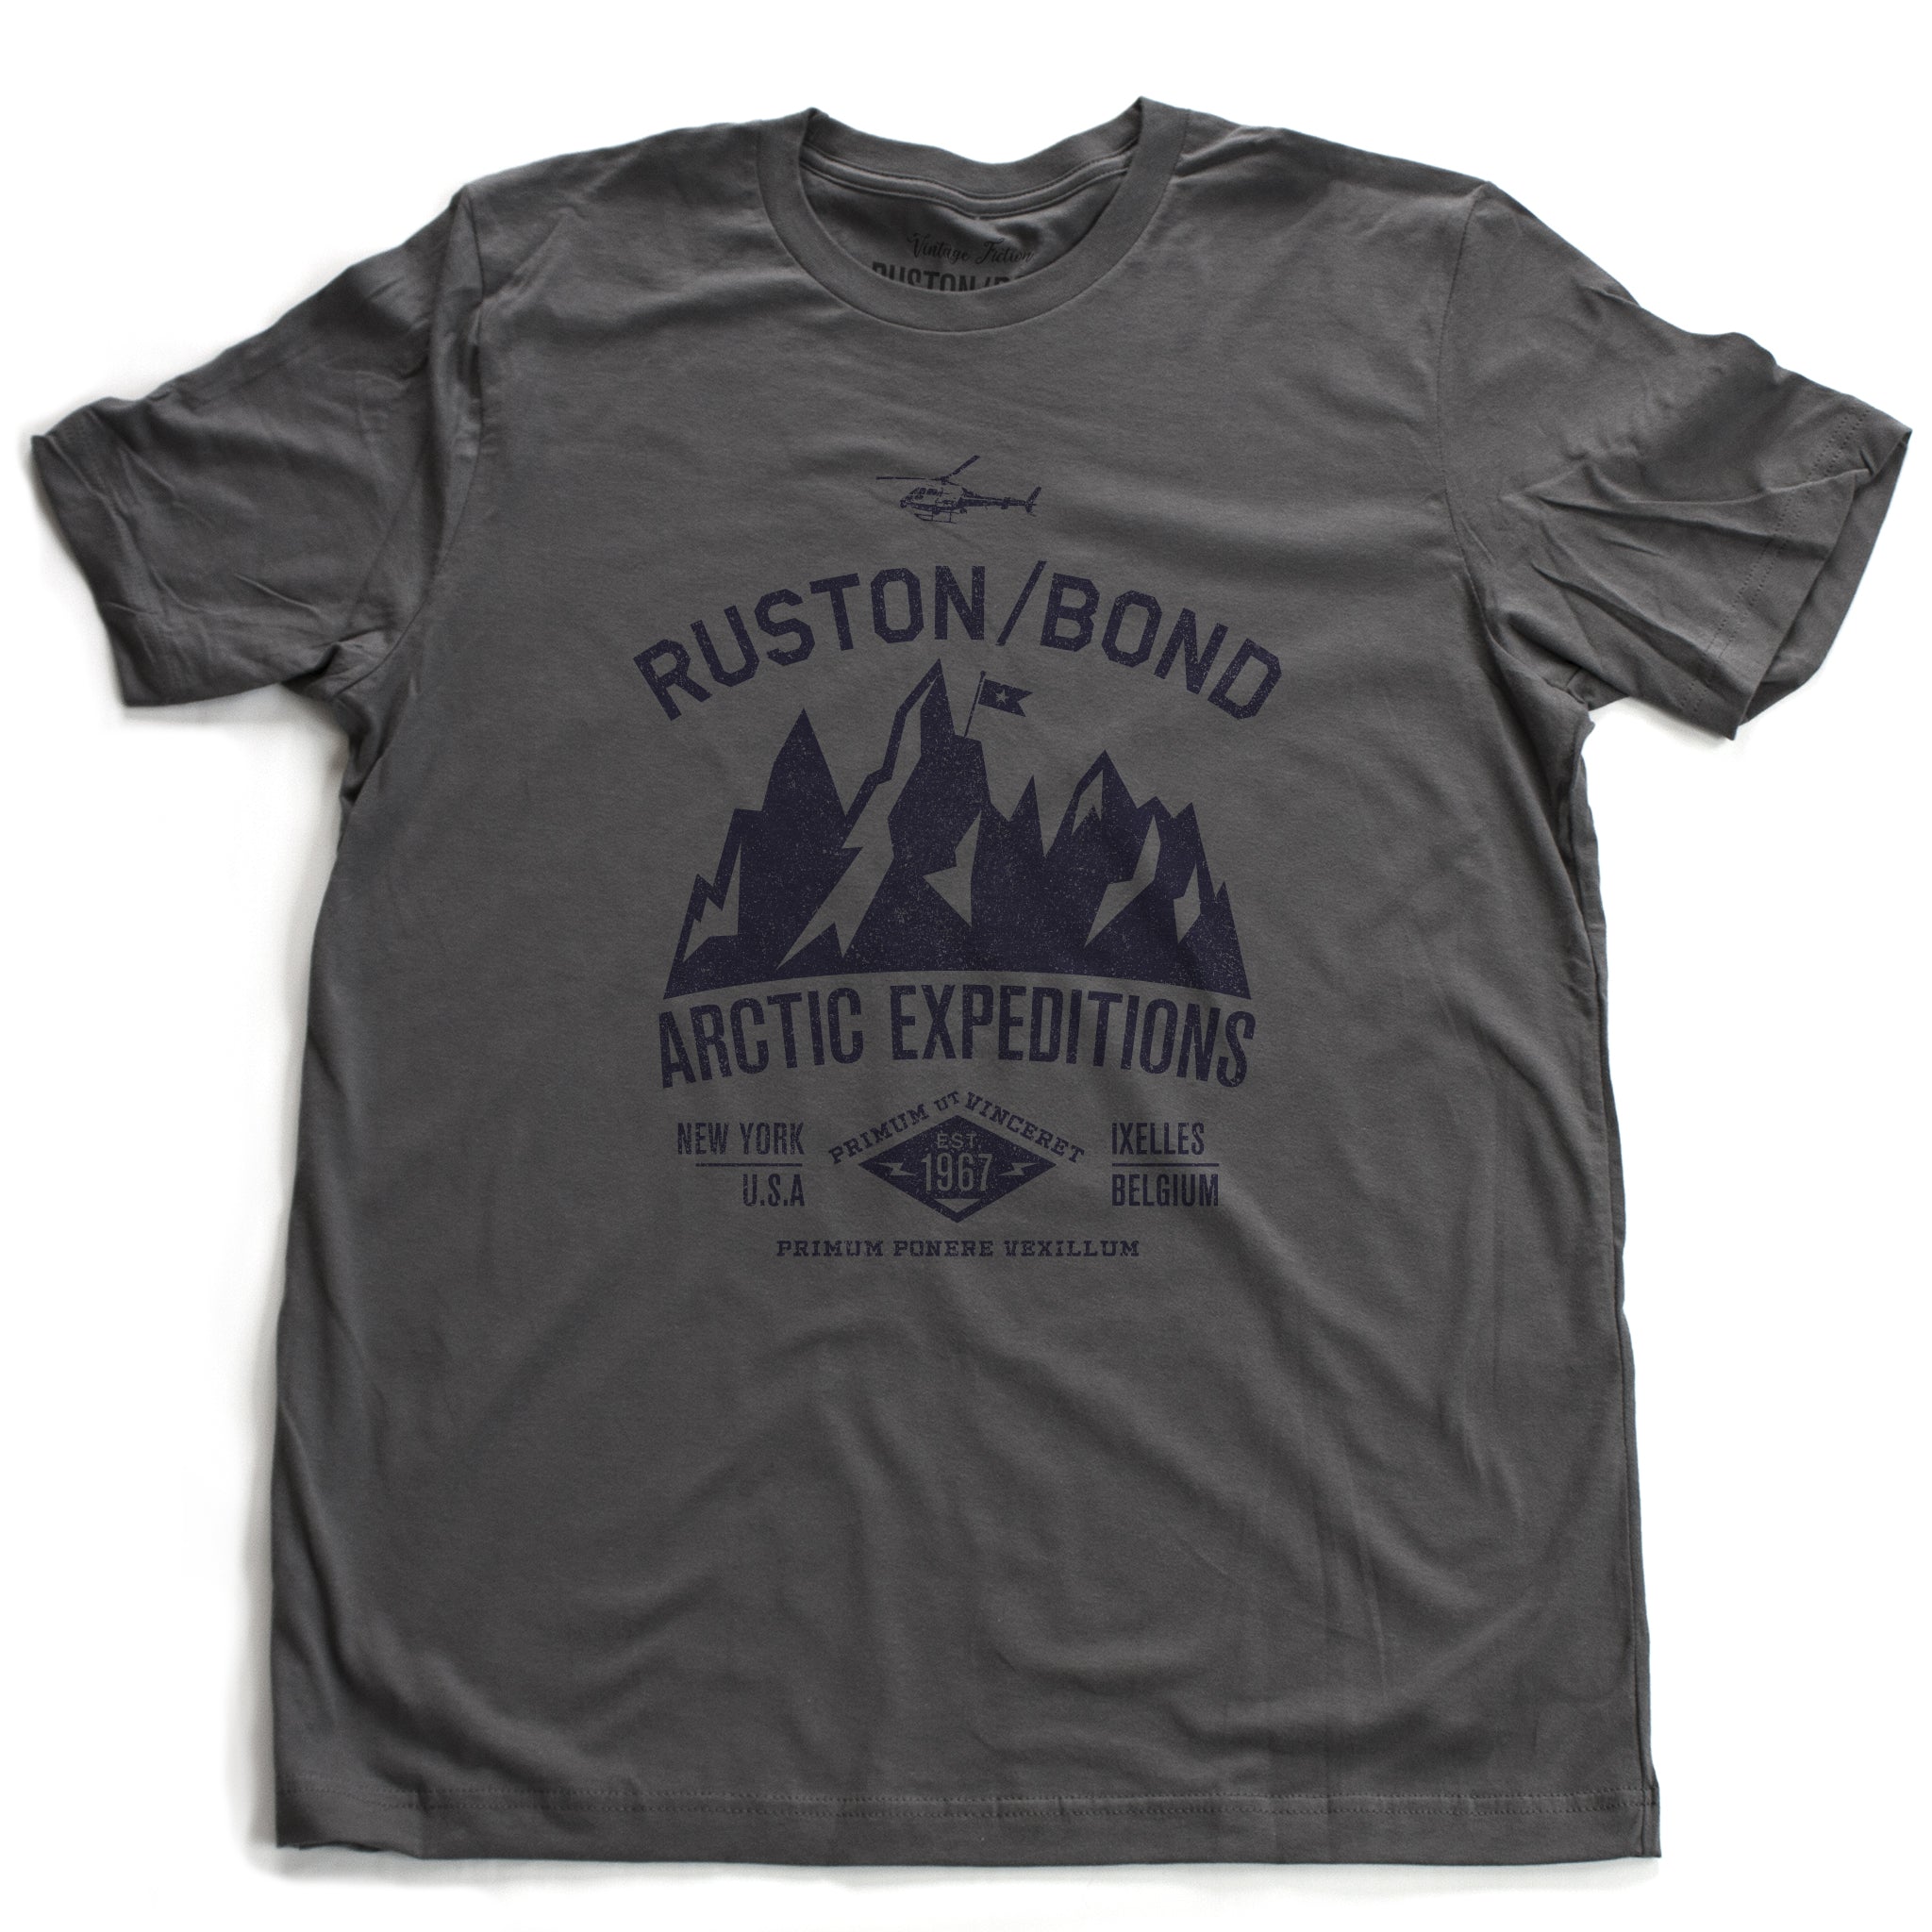 Asphalt Gray / Grey  classic, fashion, retro inspired t-shirt, with a fictional advertisement for an adventure company called Ruston/Bond Arctic Expeditions. It shows a mountain range and a helicopter, and lists the company locations in New York City and Ixelles, Belgium, and a Latin quote.